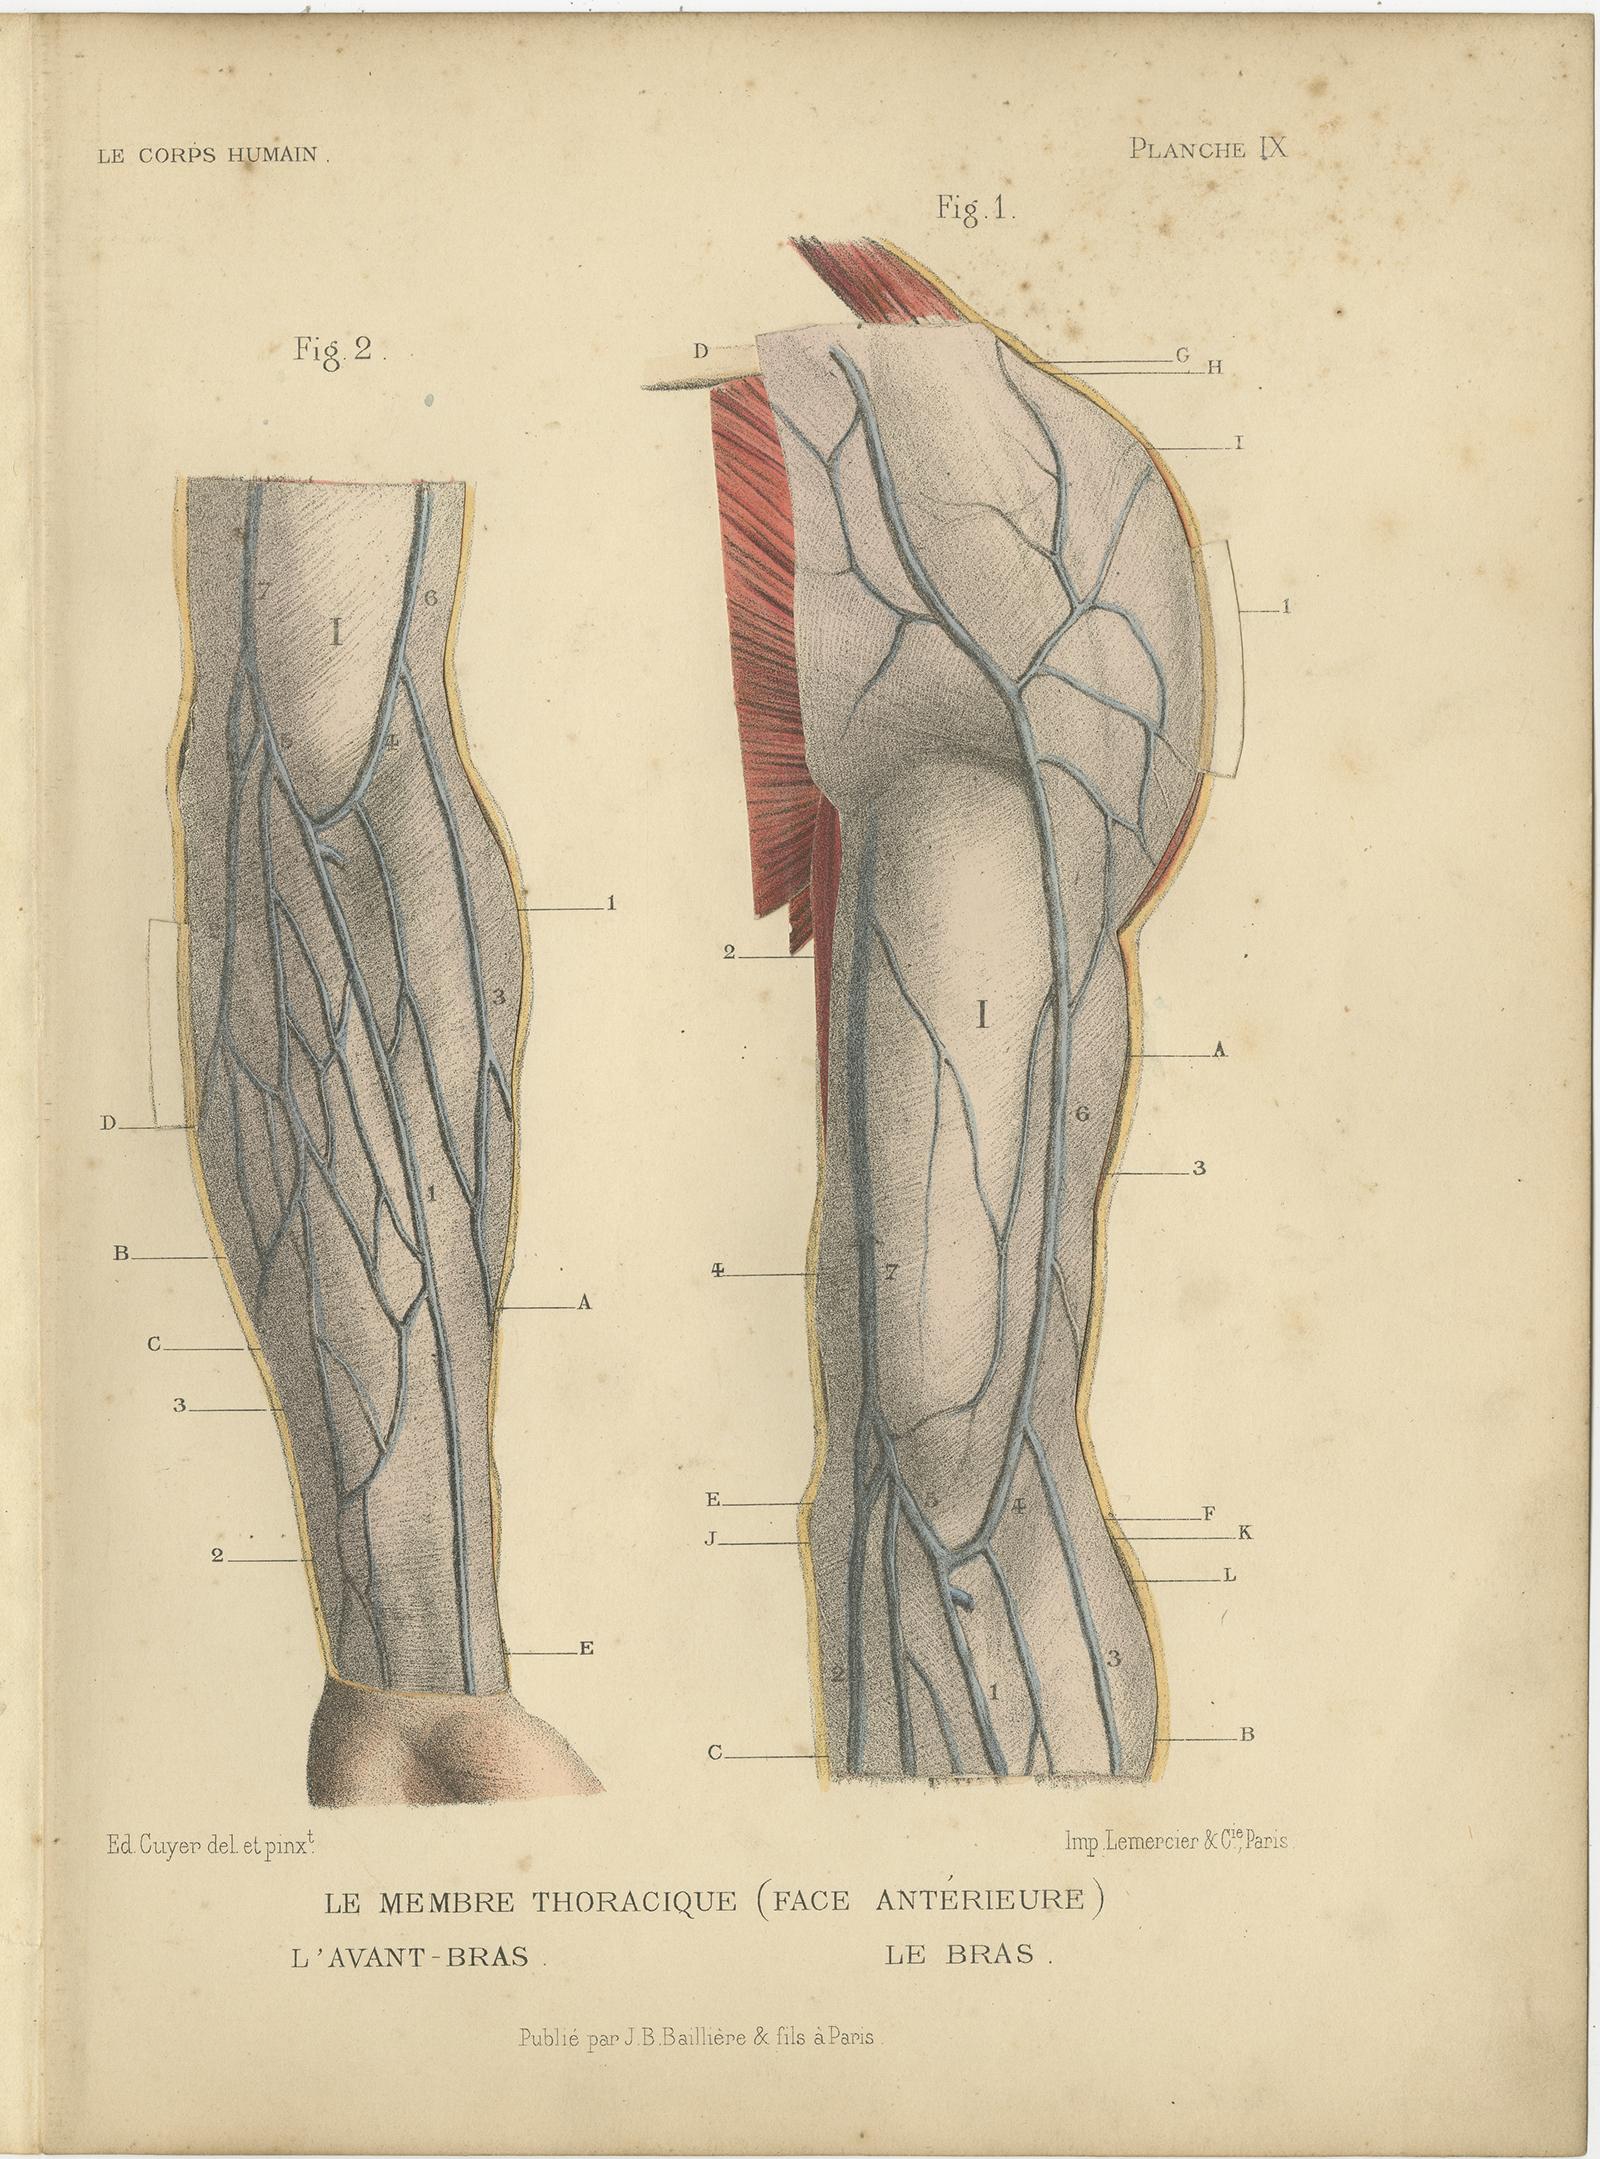 Set of four antique anatomy prints titled 'Le Membre Thoracique' and 'Le Membre Supérieur'. Colored lithographs of human arms with superimposed flaps. These prints originate from 'Le Corps Humain' by G.A. Kuhff. Illustrated by Edouard Cuyer.